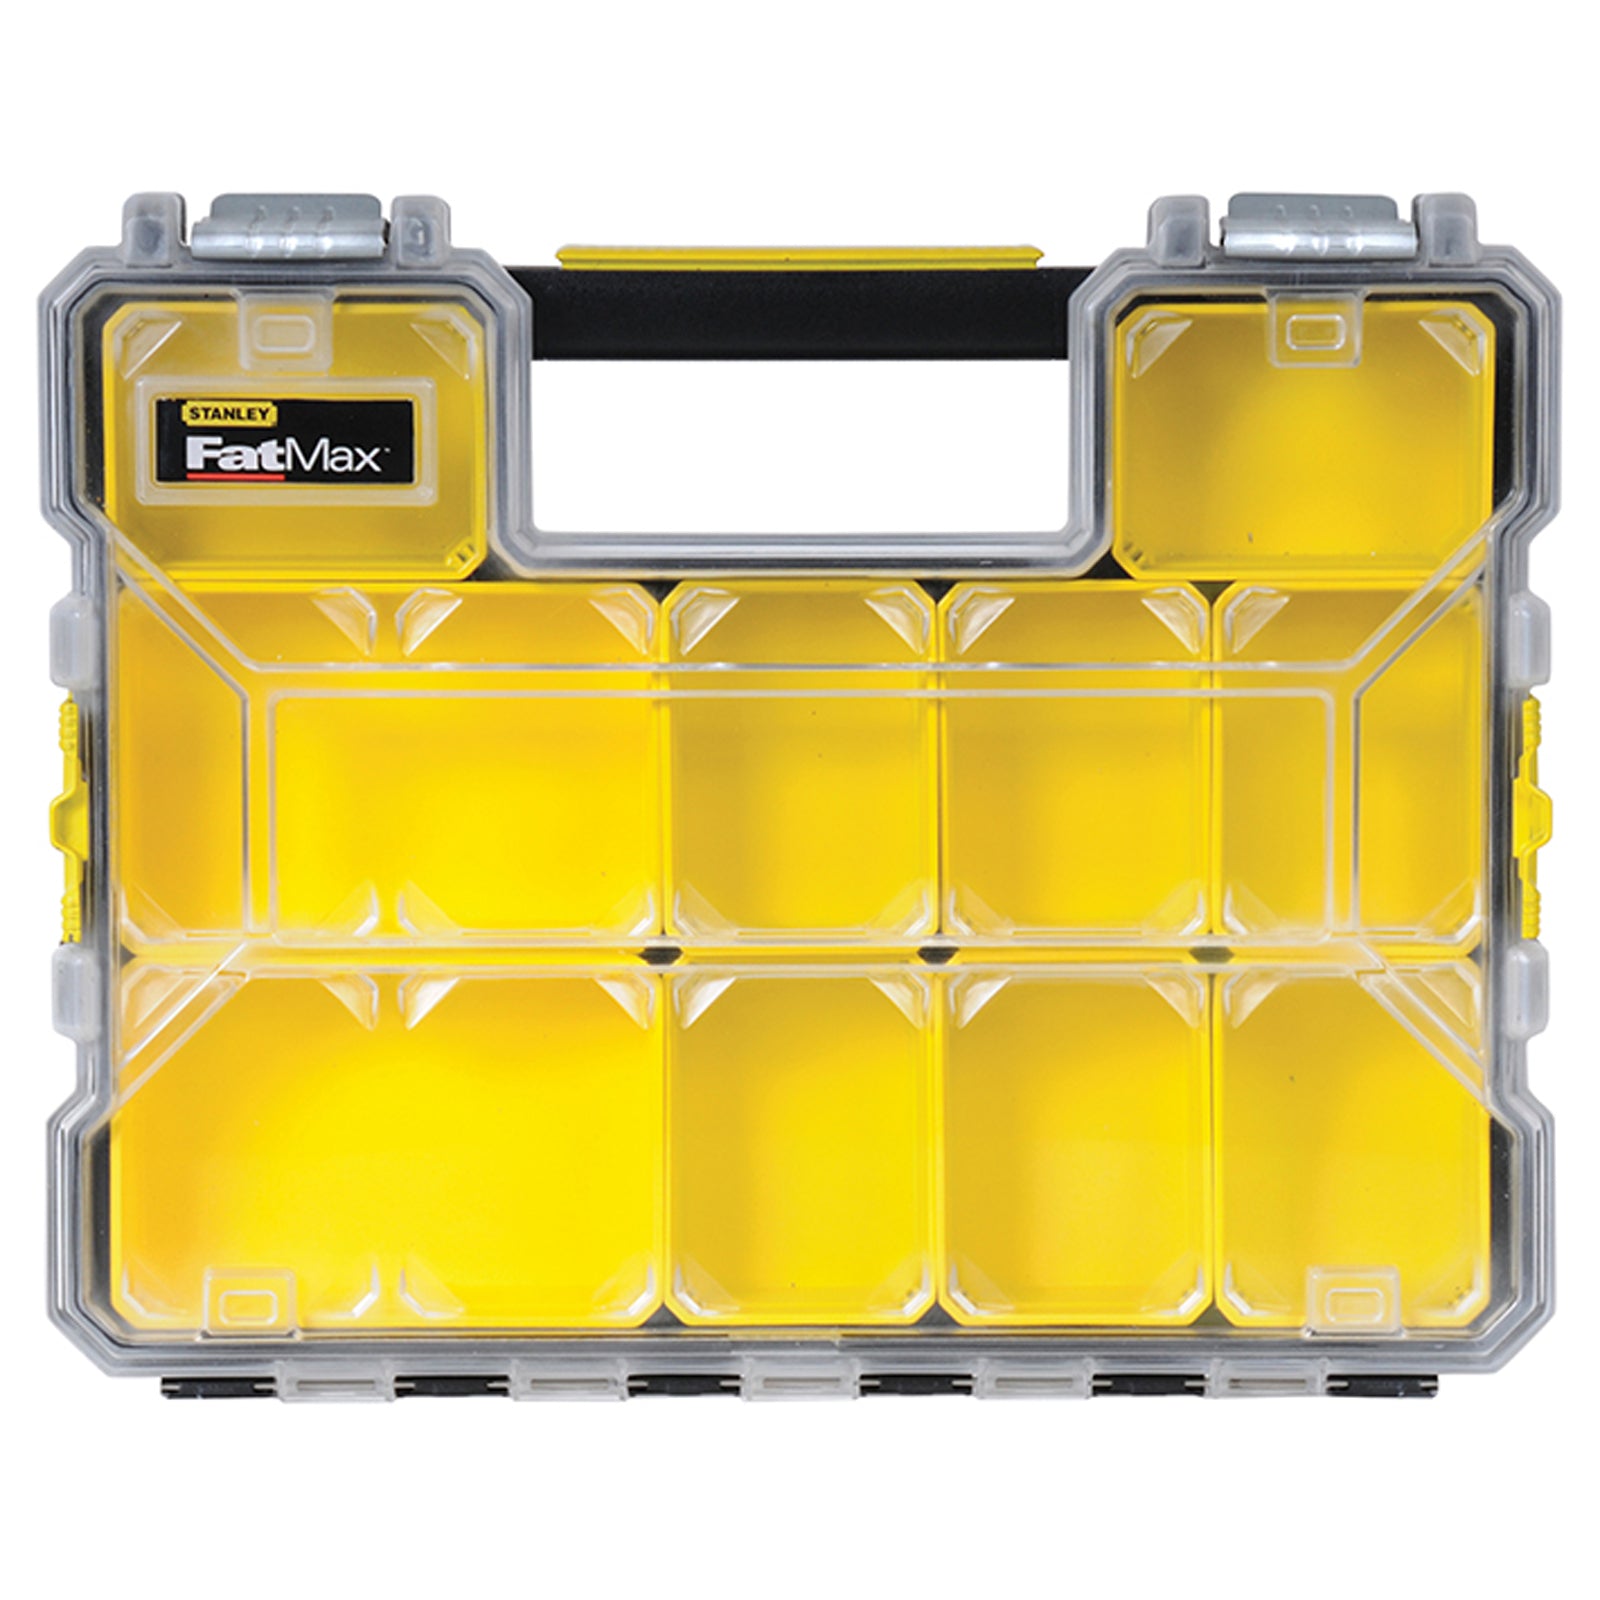 Stanley FatMax Shallow Stackable Professional Organiser